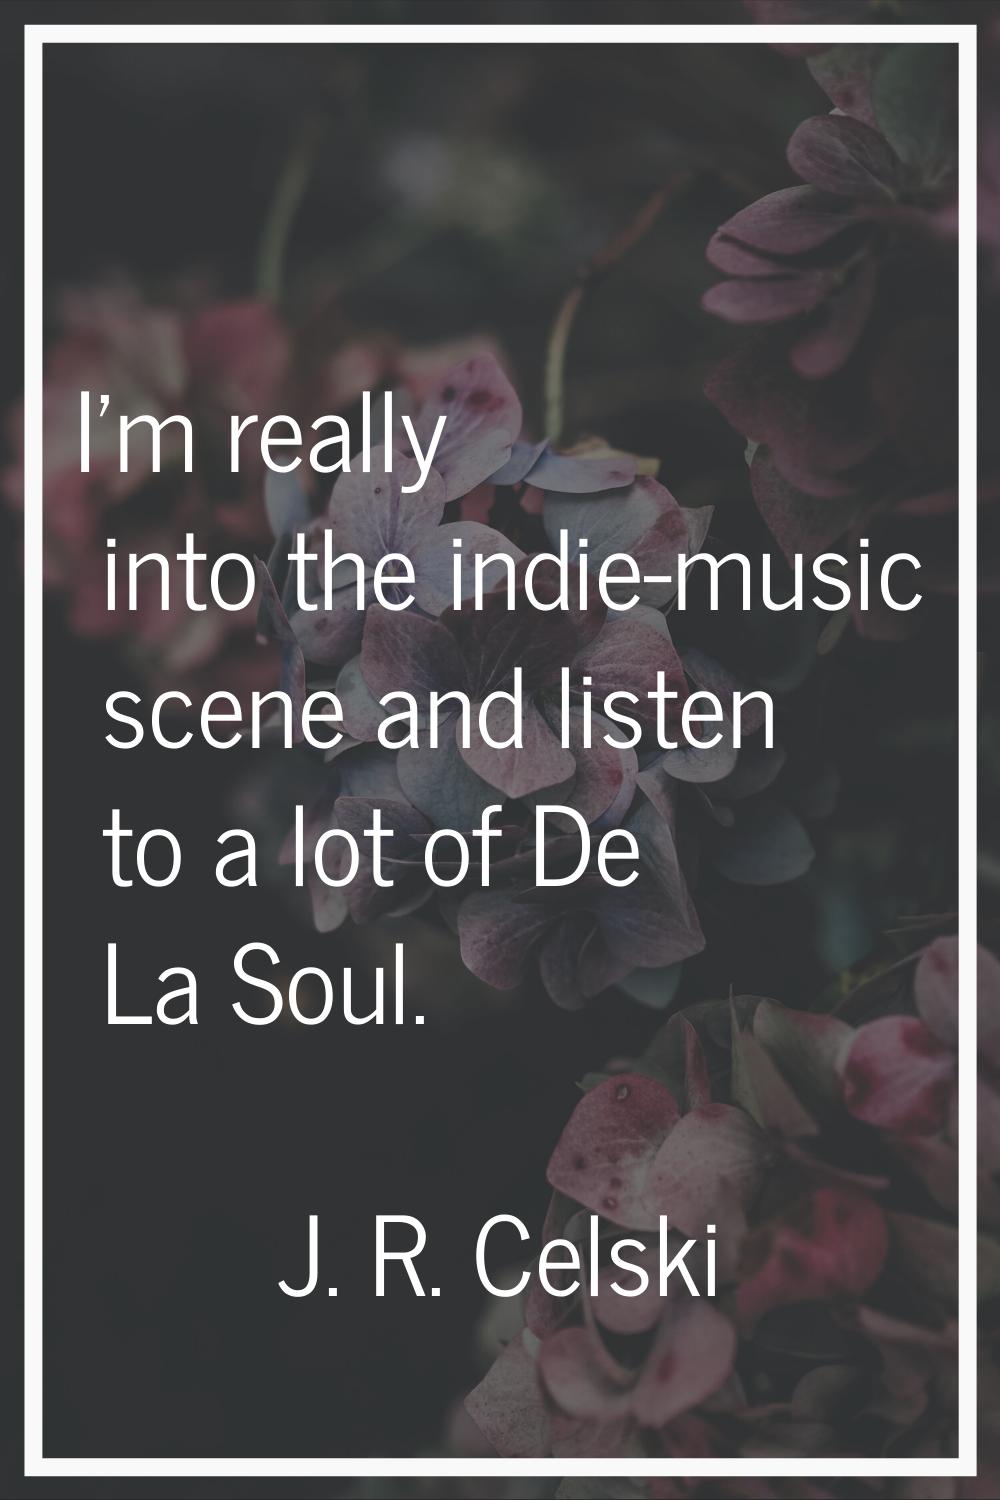 I'm really into the indie-music scene and listen to a lot of De La Soul.